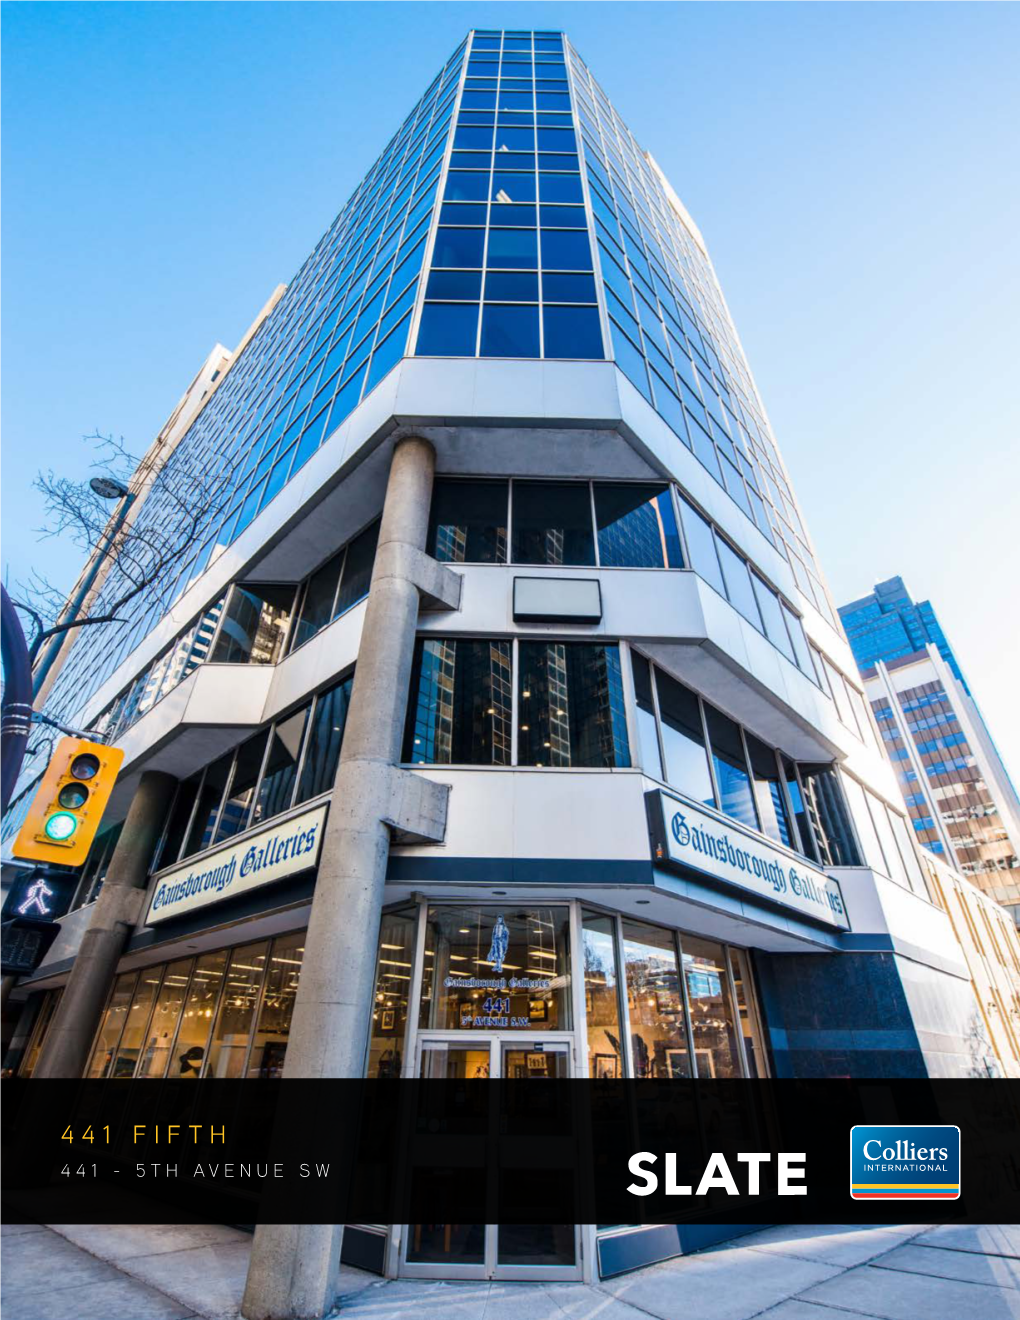 441 Fifth 441 - 5Th Avenue Sw Building Information